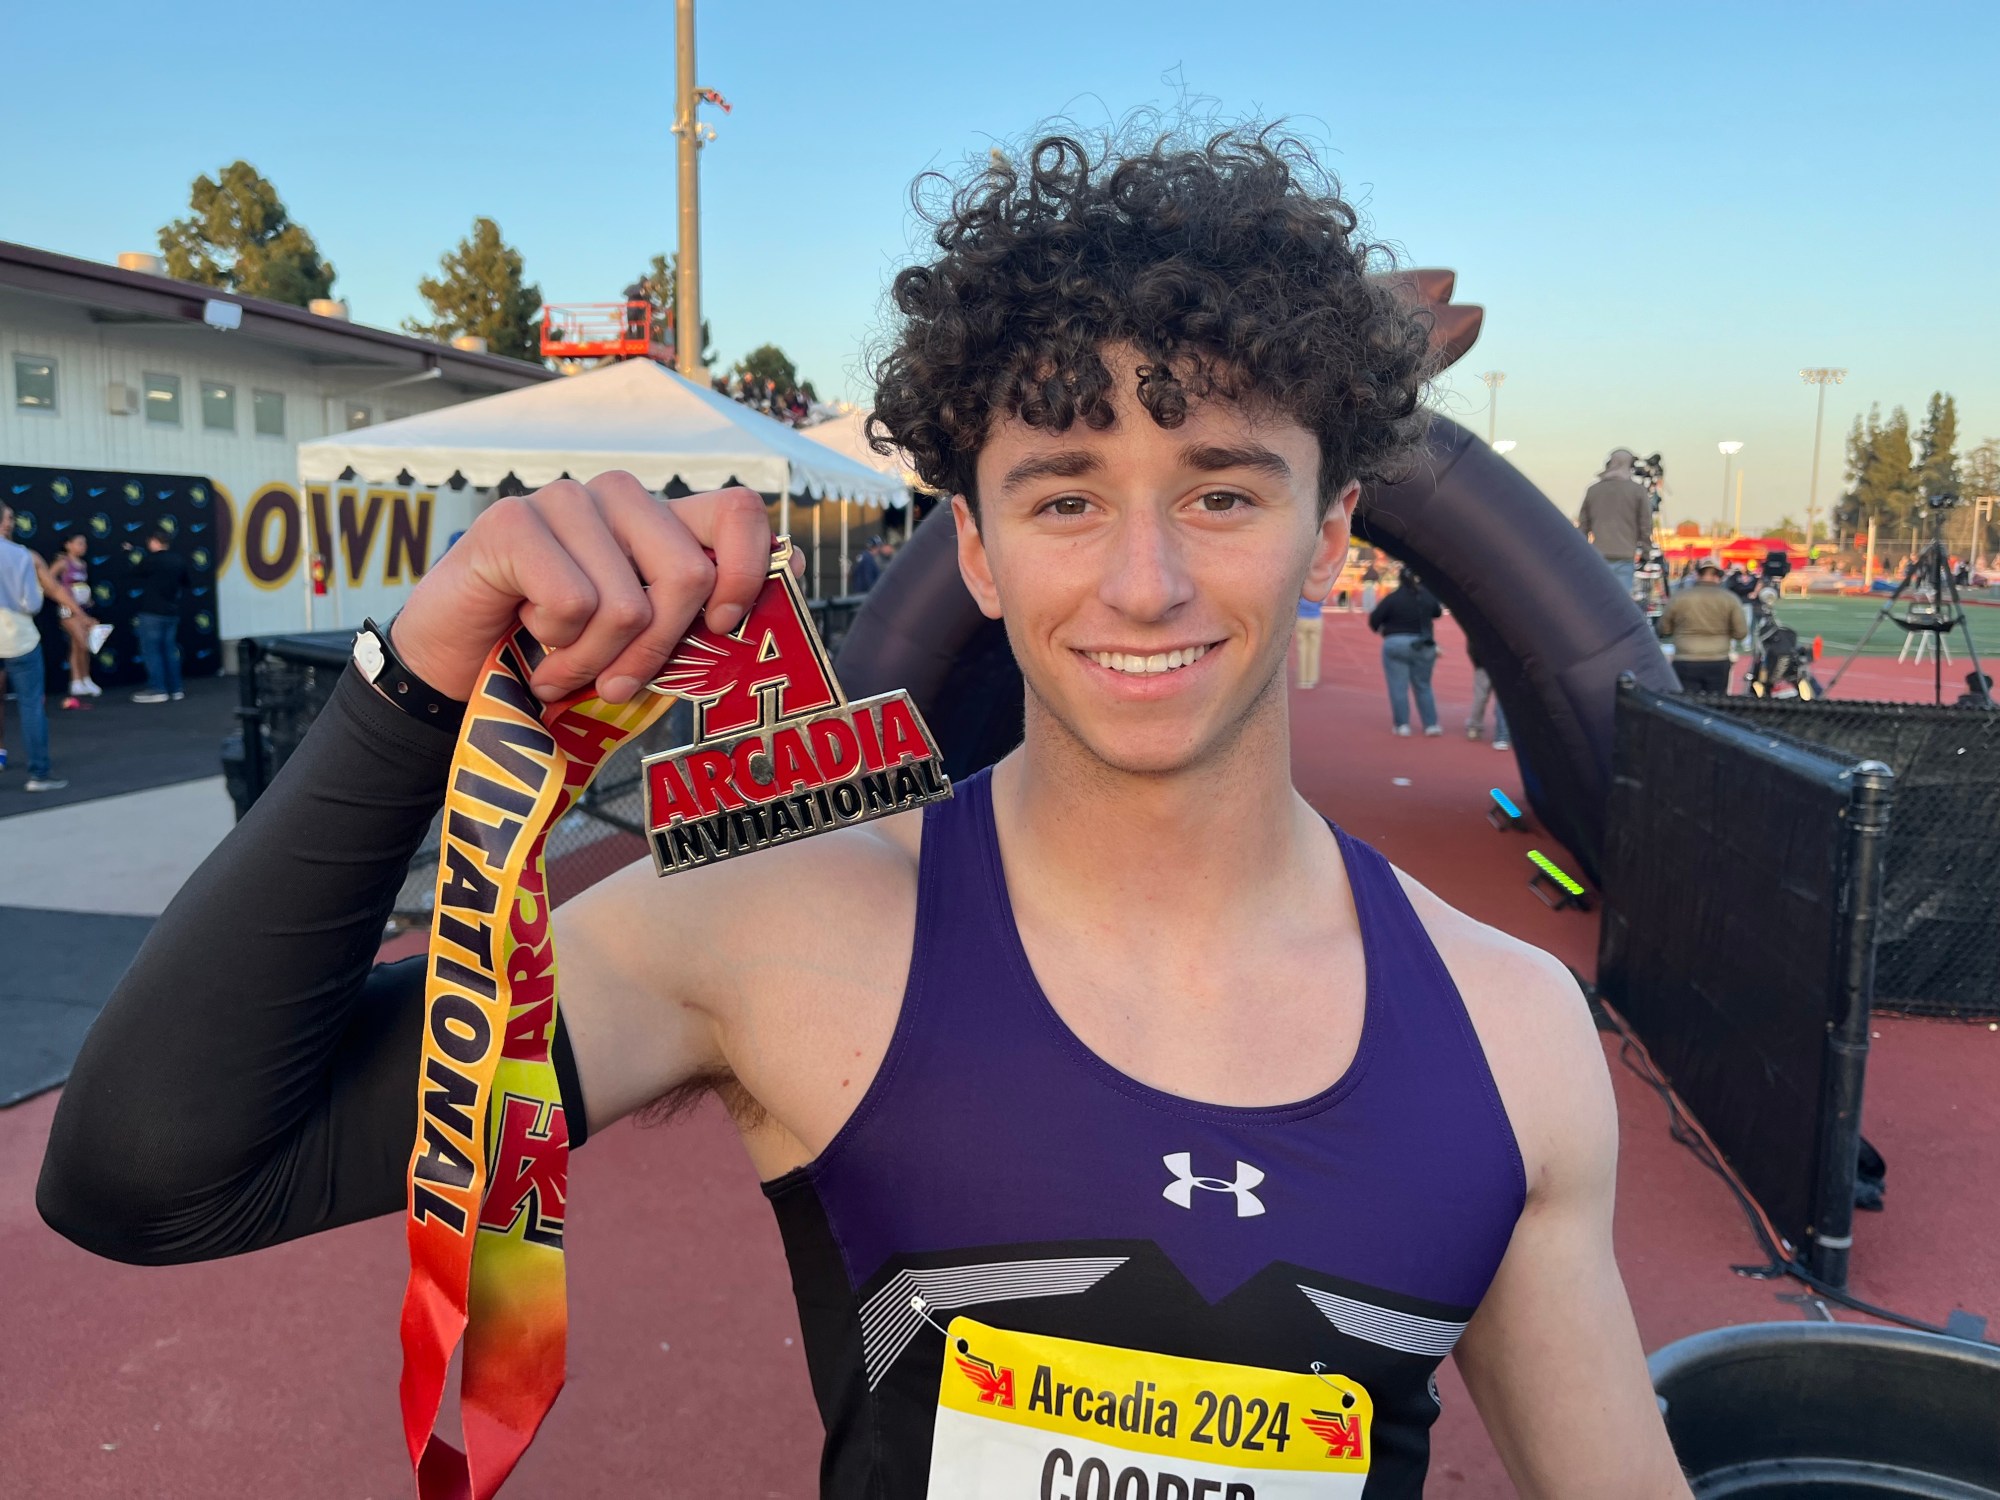 Portola senior Rider Cooper shows off his medal for finishing second in the 400 meters at the Arcadia Invitational track and field meet Saturday. (Photo by Steve Fryer, Orange County Register/SCNG)